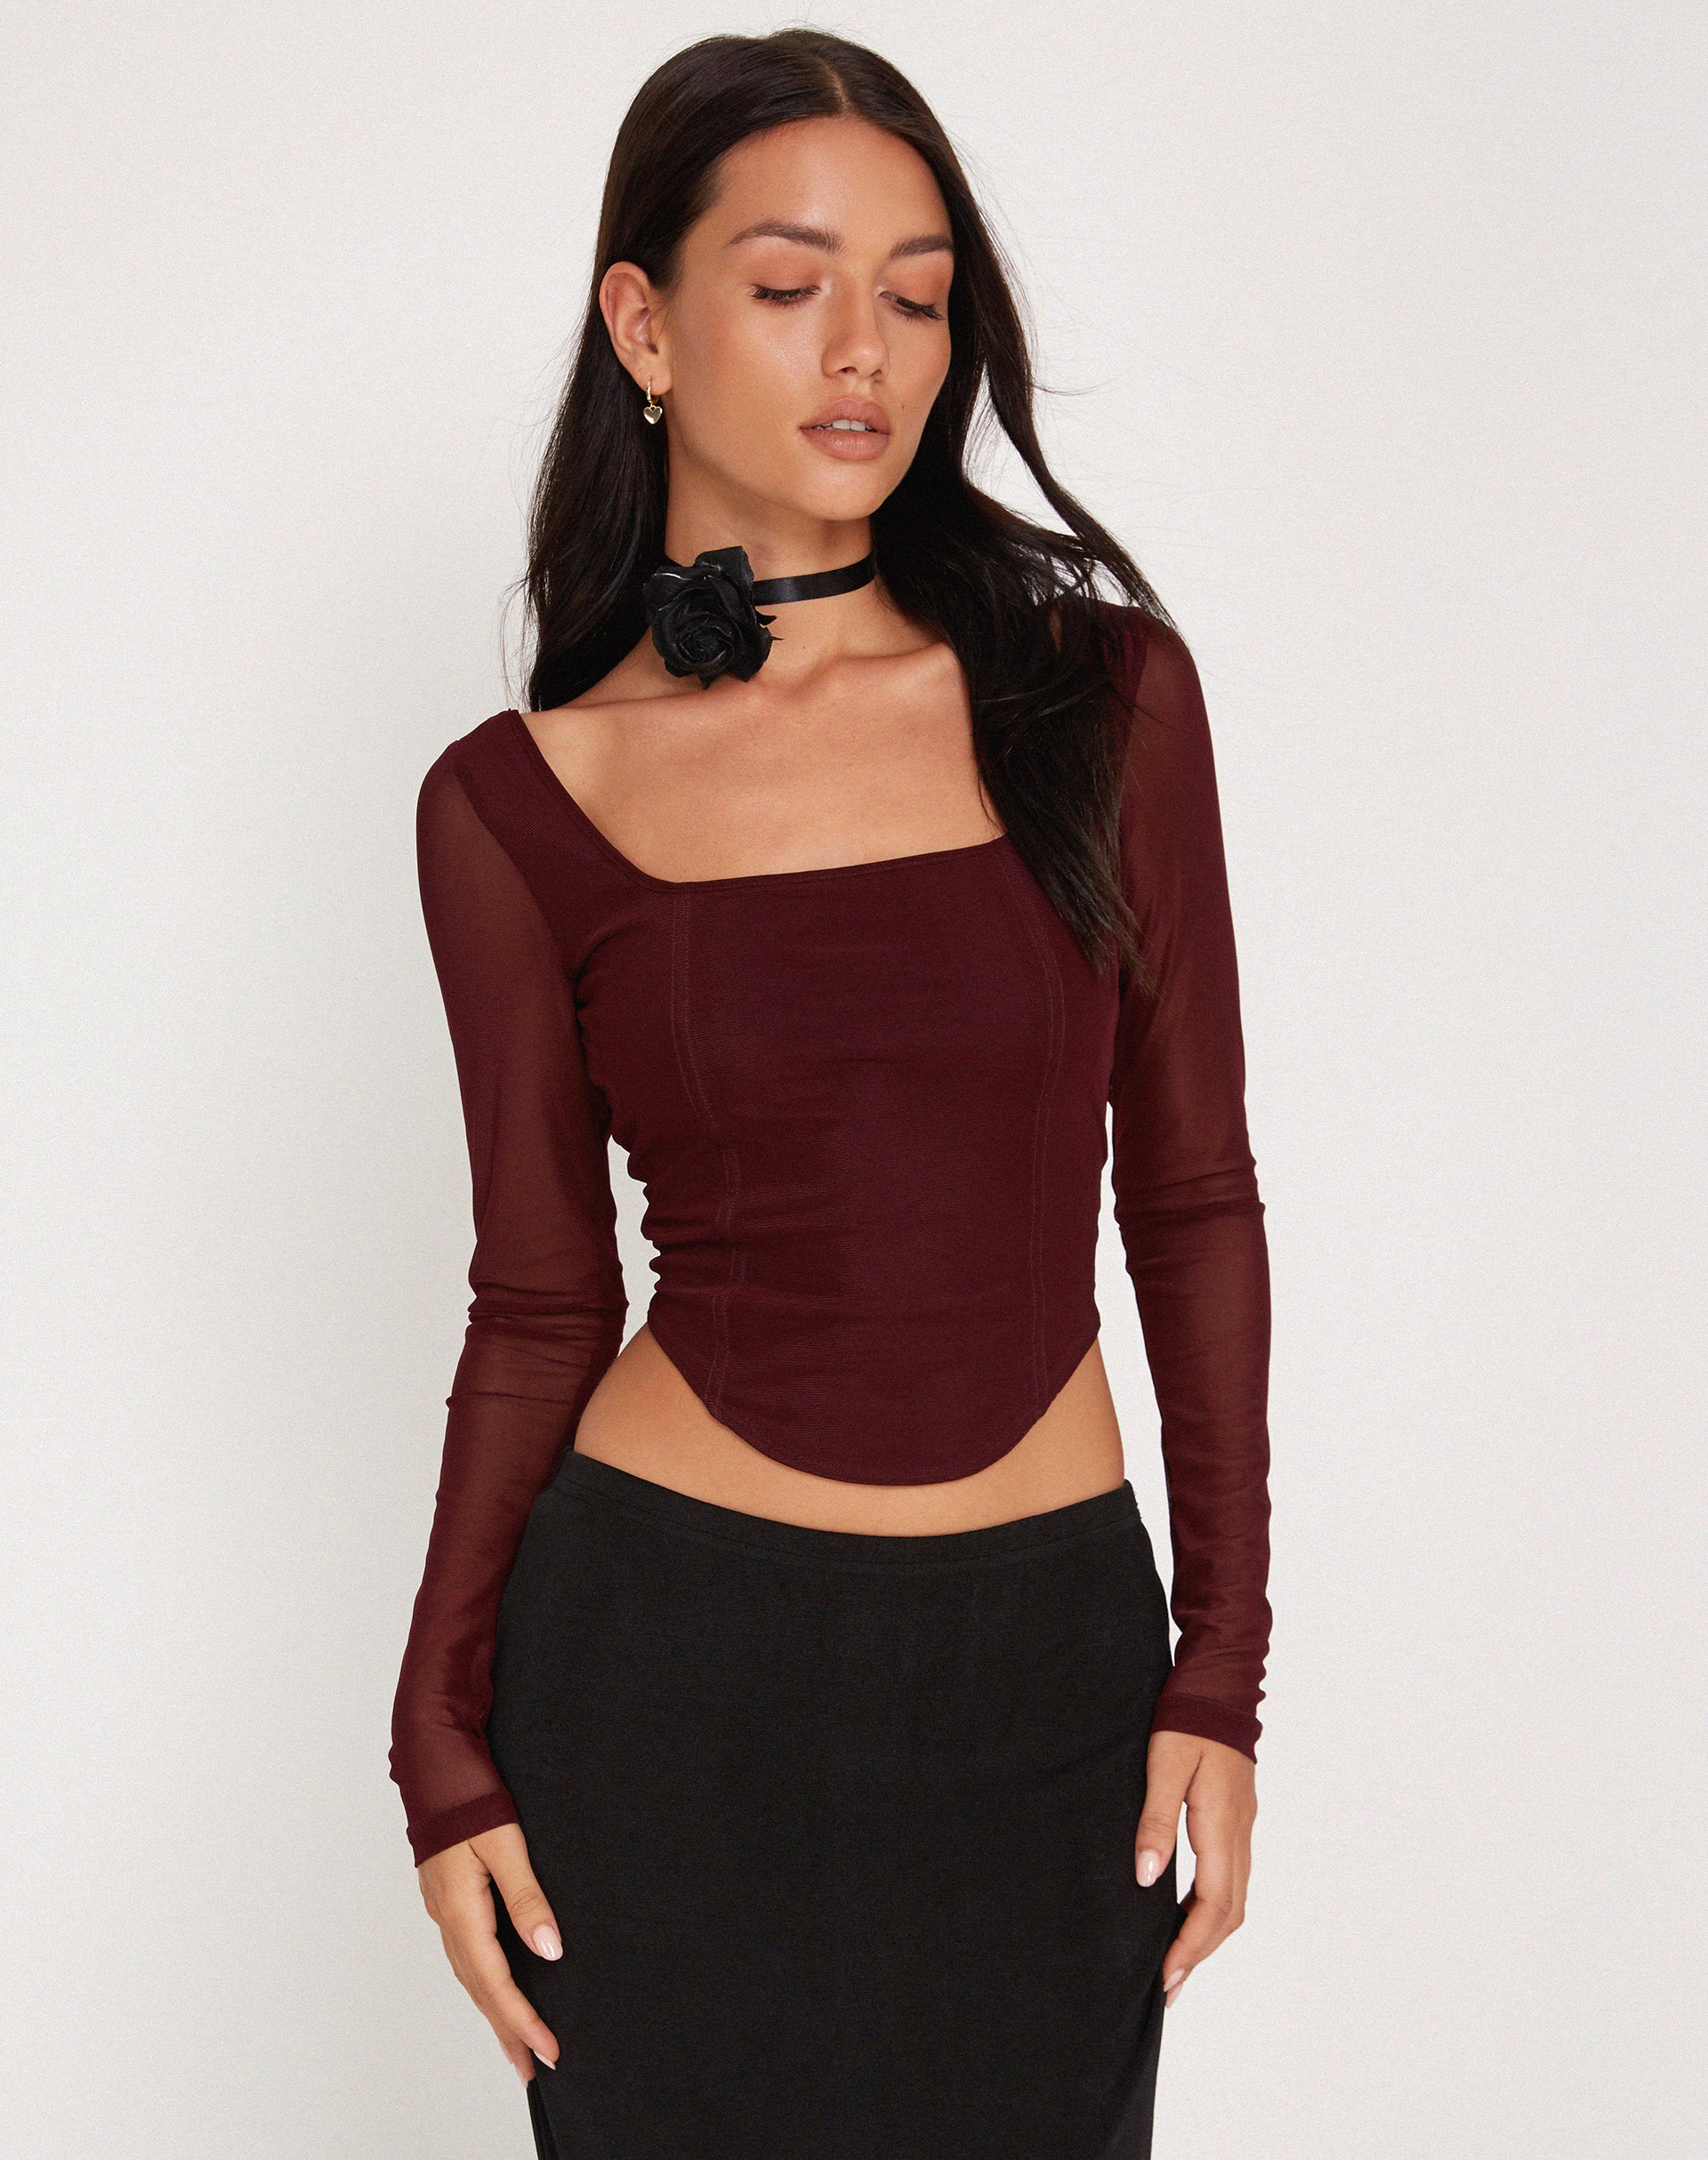  Women Corset Brami Crop Top Sexy V Neck Plunging Tight Plain  Cropped Tank Tops Rave Euphoria Outfit Trendy Going Out Tops Casual Summer  Burgundy XL